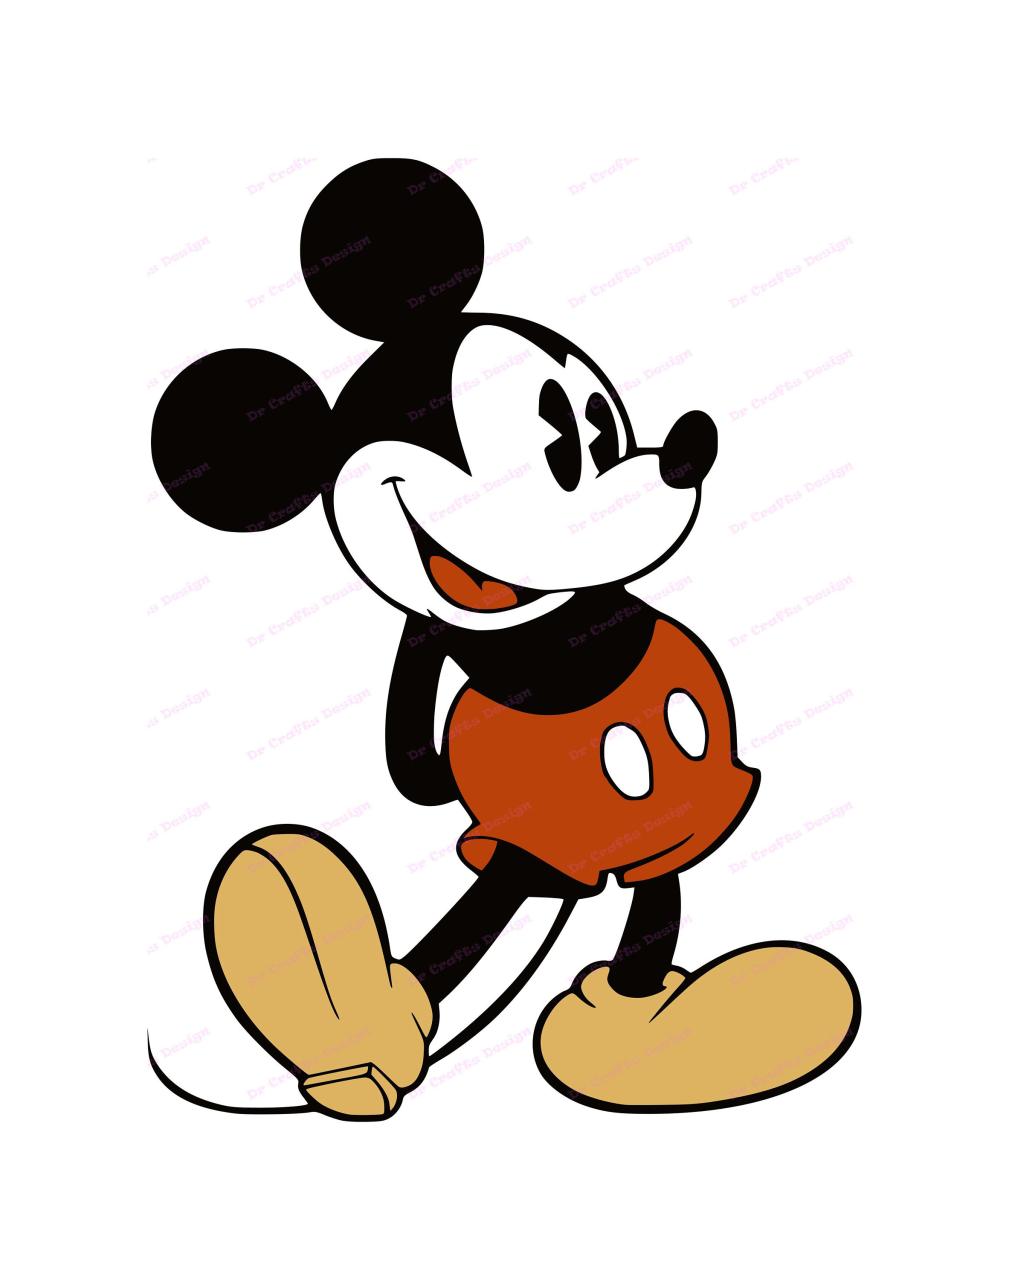 Mickey Mouse SVG Image